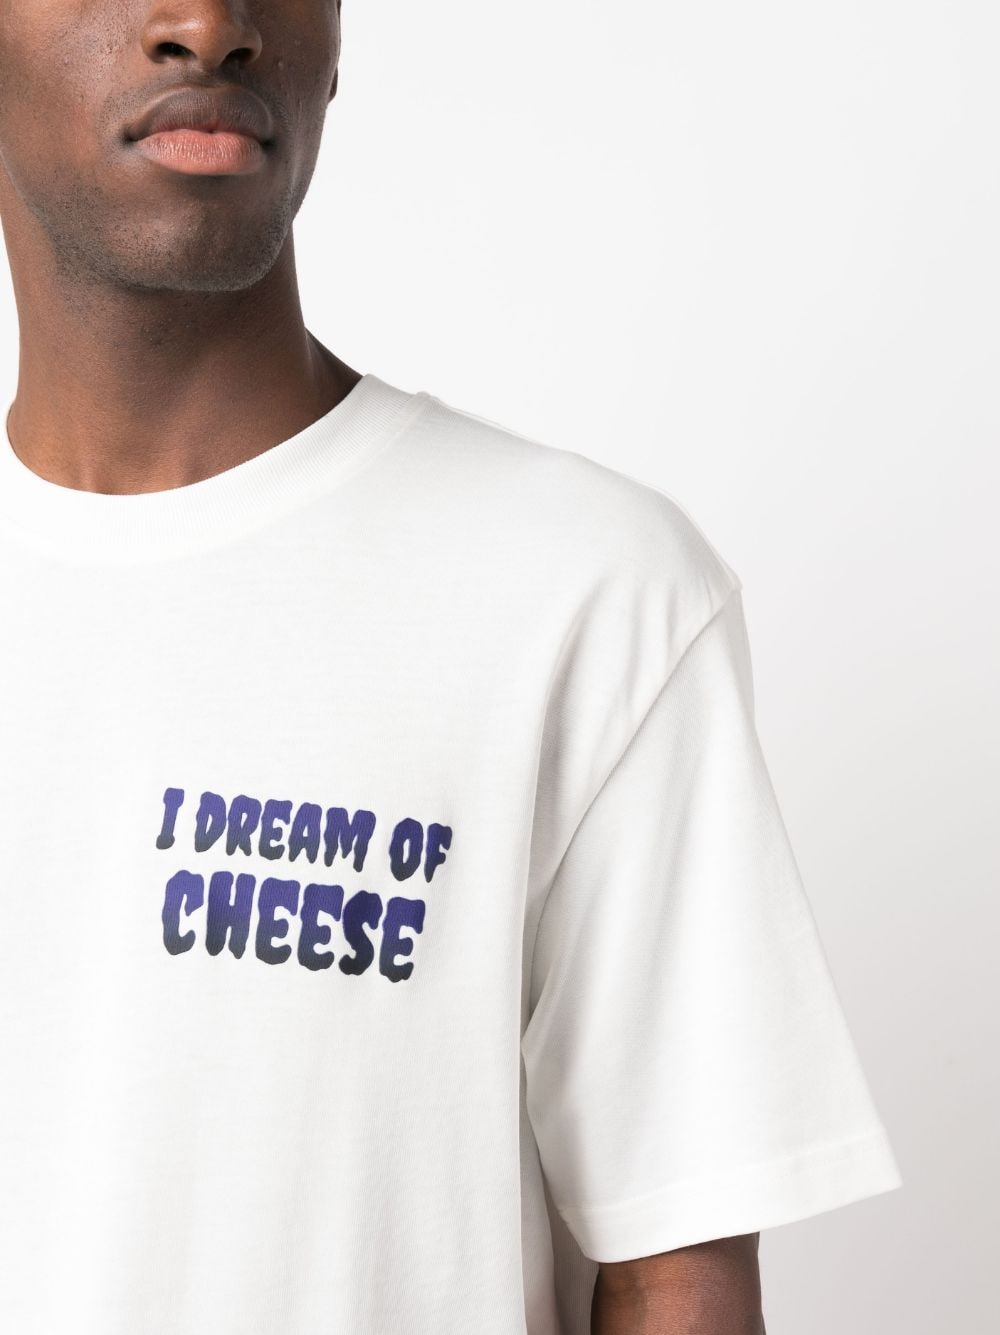 JW Anderson T-shirt "I dream of cheese" - Lothaire